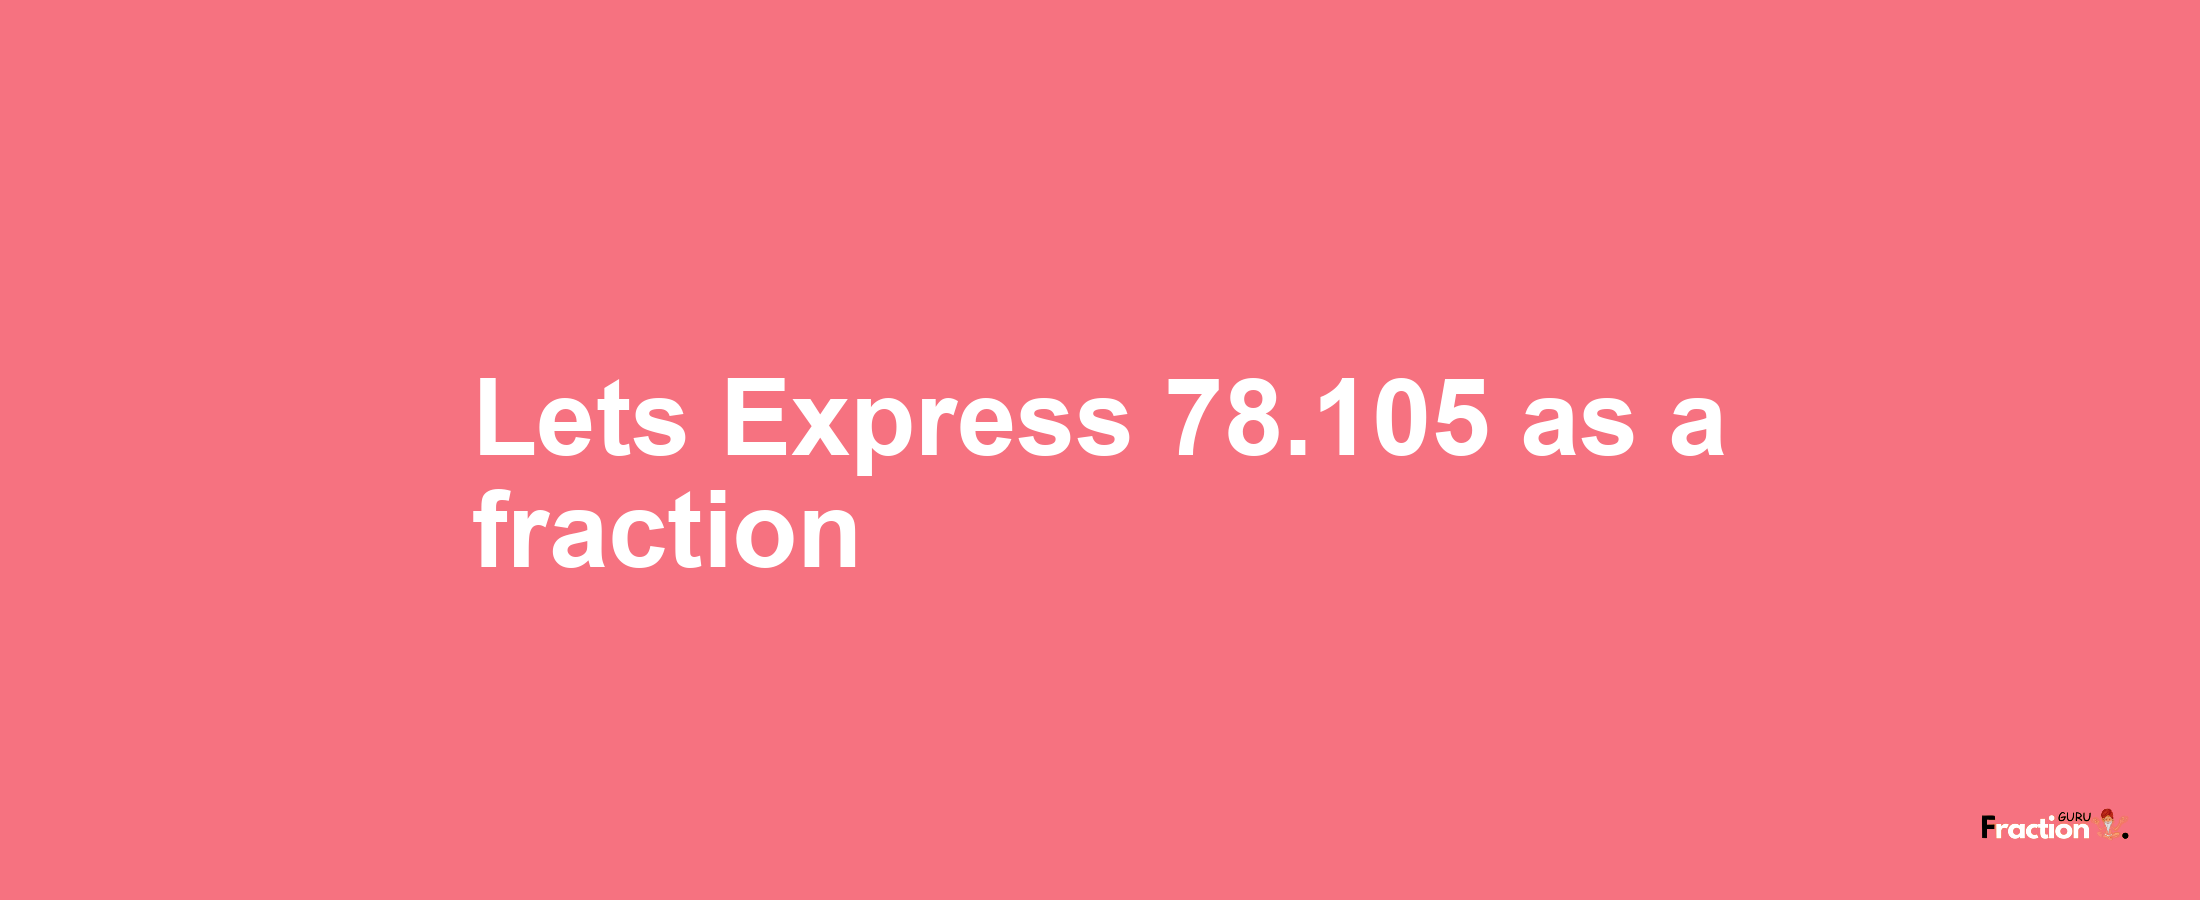 Lets Express 78.105 as afraction